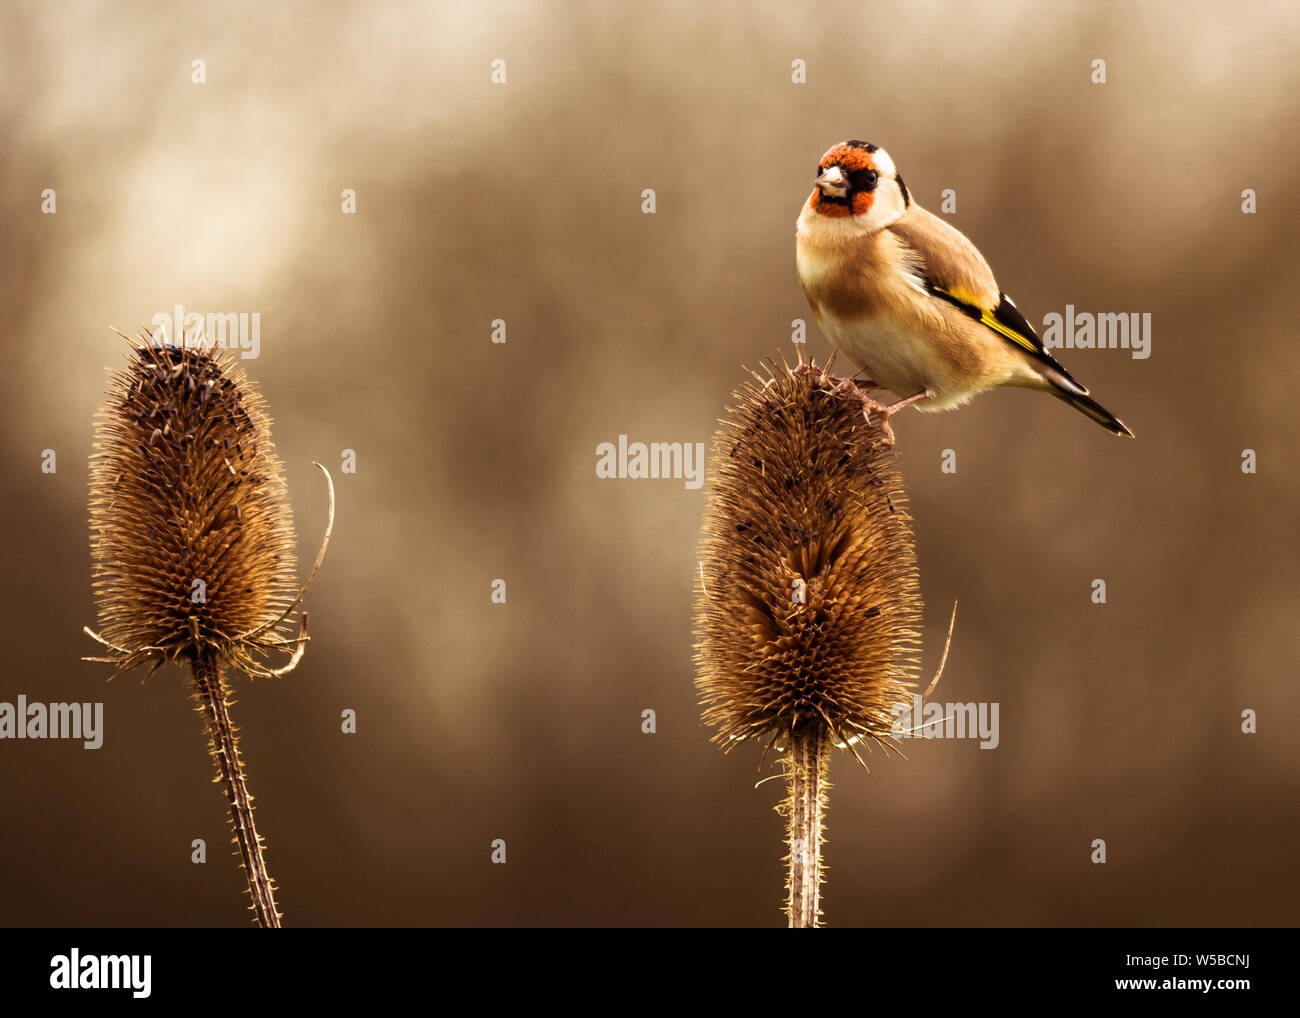 Goldfinch perched on top of teasel feeding on seed Stock Photo